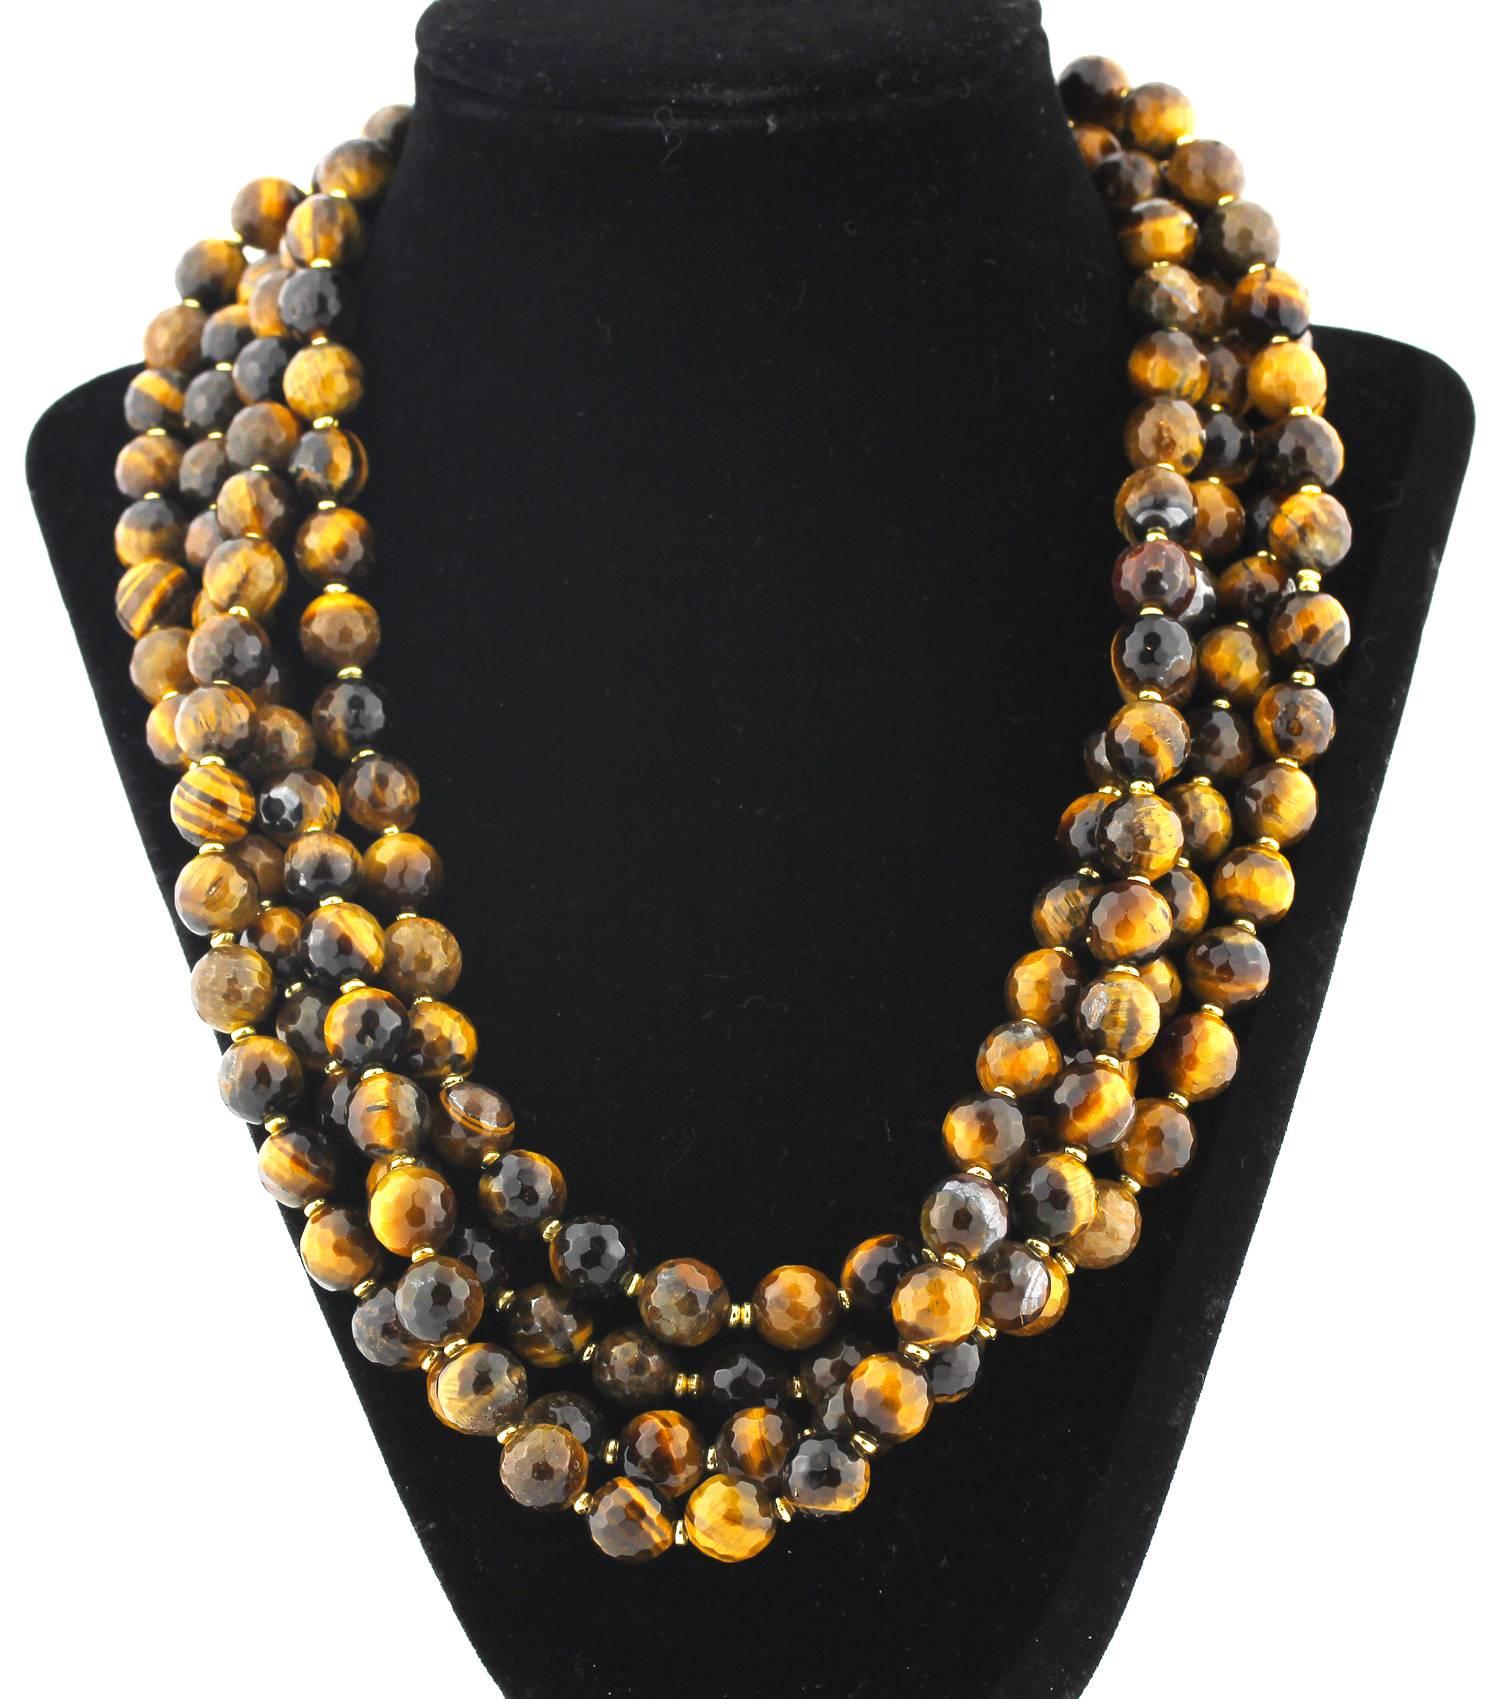 Beautifully checkerboard gemcut and polished sparkling Tiger Eye Necklace
Size:  10 mm
Length:  20.5 inches 
Strands:  4
Clasp:  gold tone
 